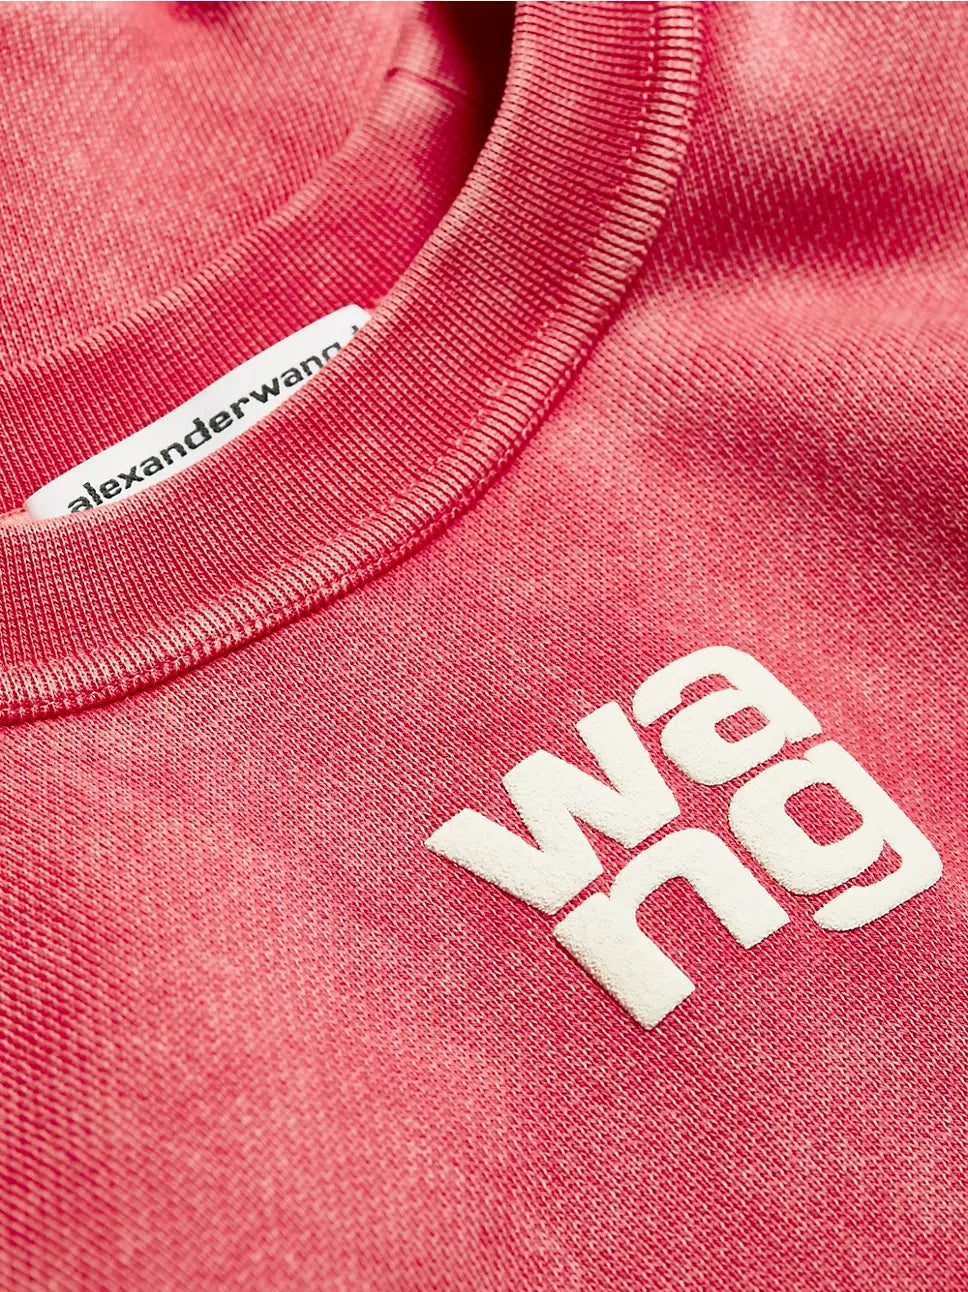 The Alexander Wang Essential Terry Crew Sweatshirt W Puff Paint Logo in Soft Cherry available at The New Trend Australia